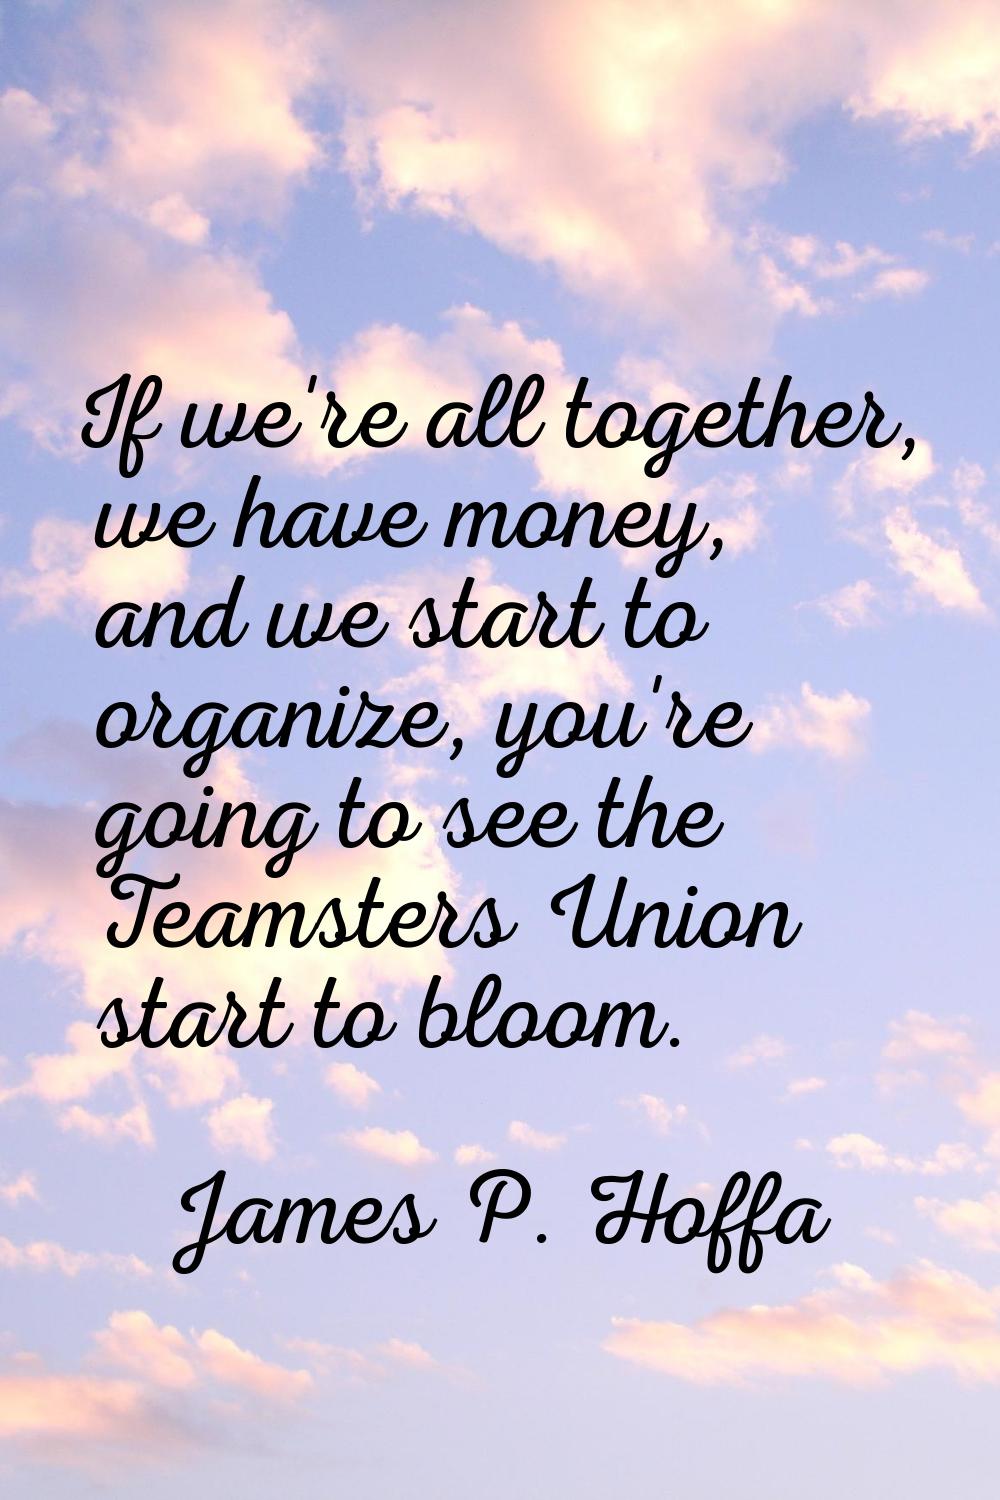 If we're all together, we have money, and we start to organize, you're going to see the Teamsters U